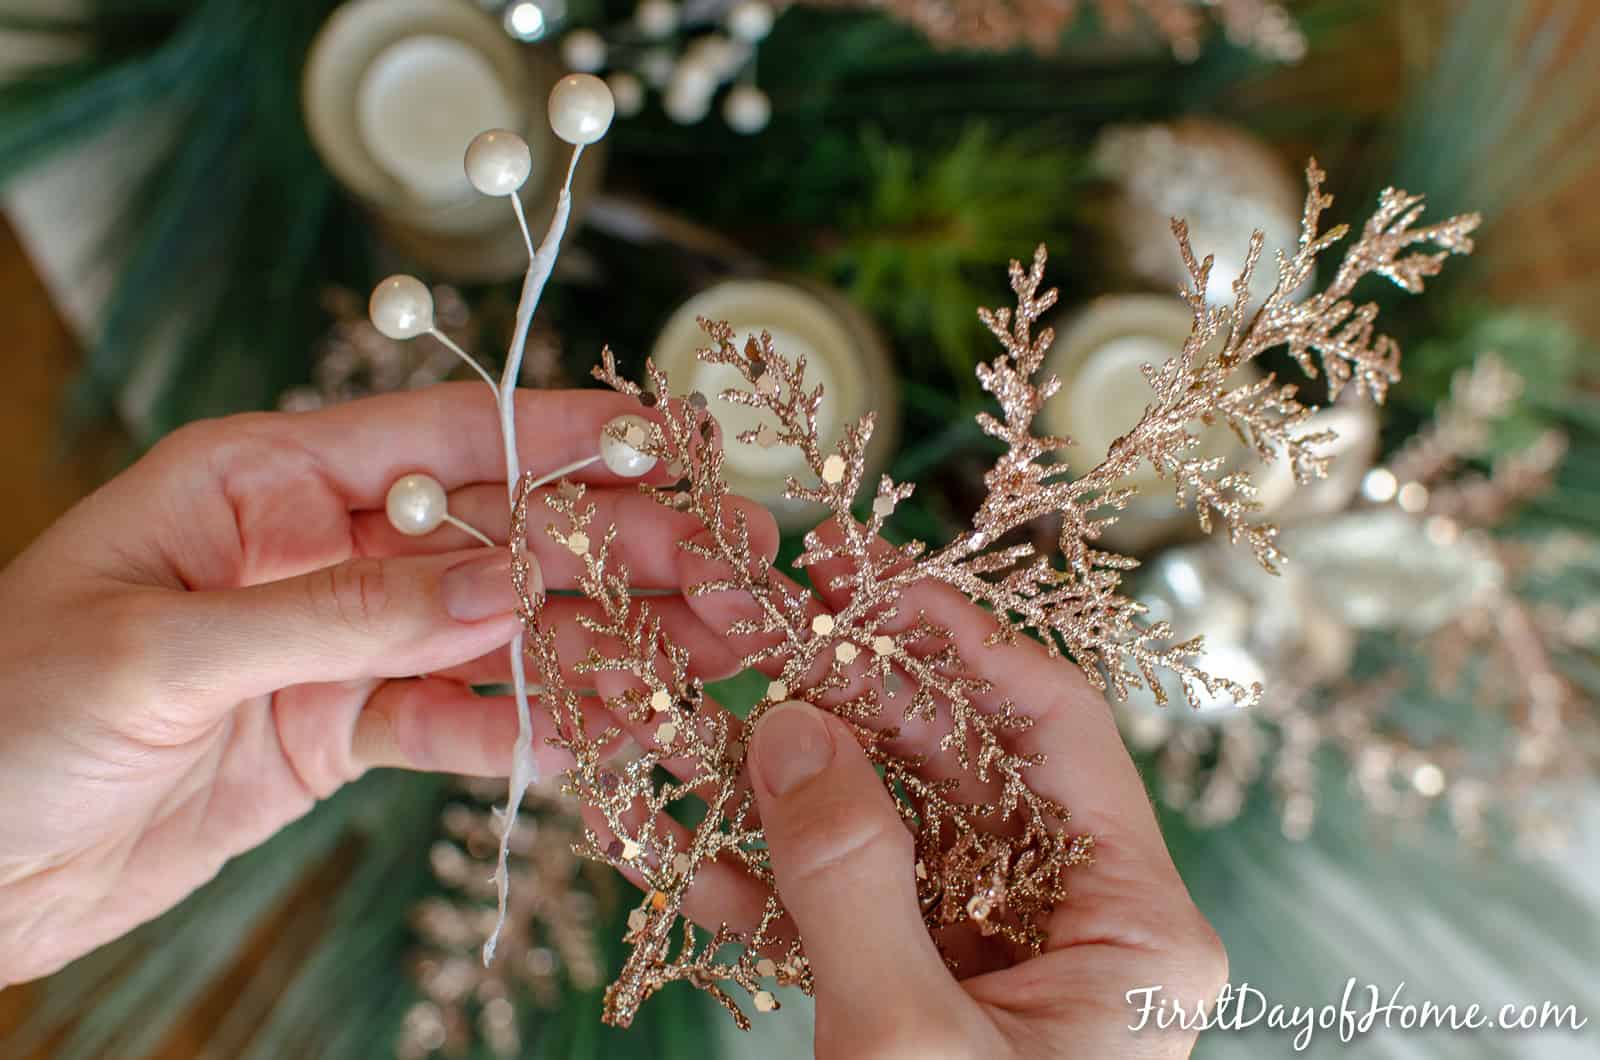 Ivory berry stem and gold leaf spray for DIY holiday centerpiece with mercury glass votives